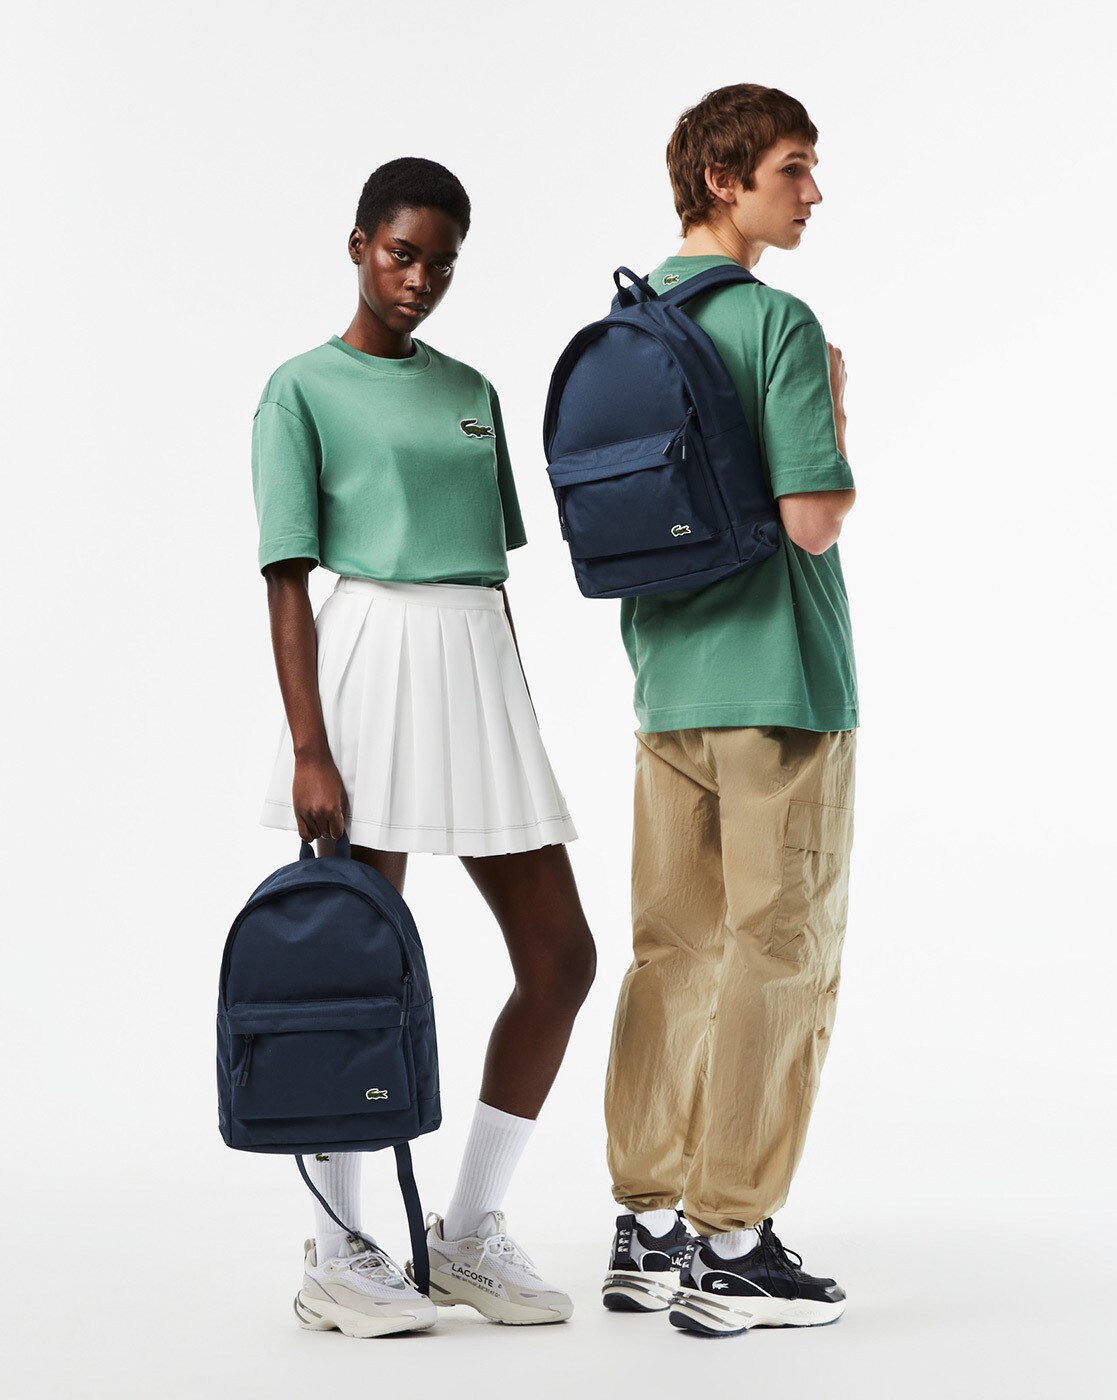 Lacoste NH3313HF Backpack Blue